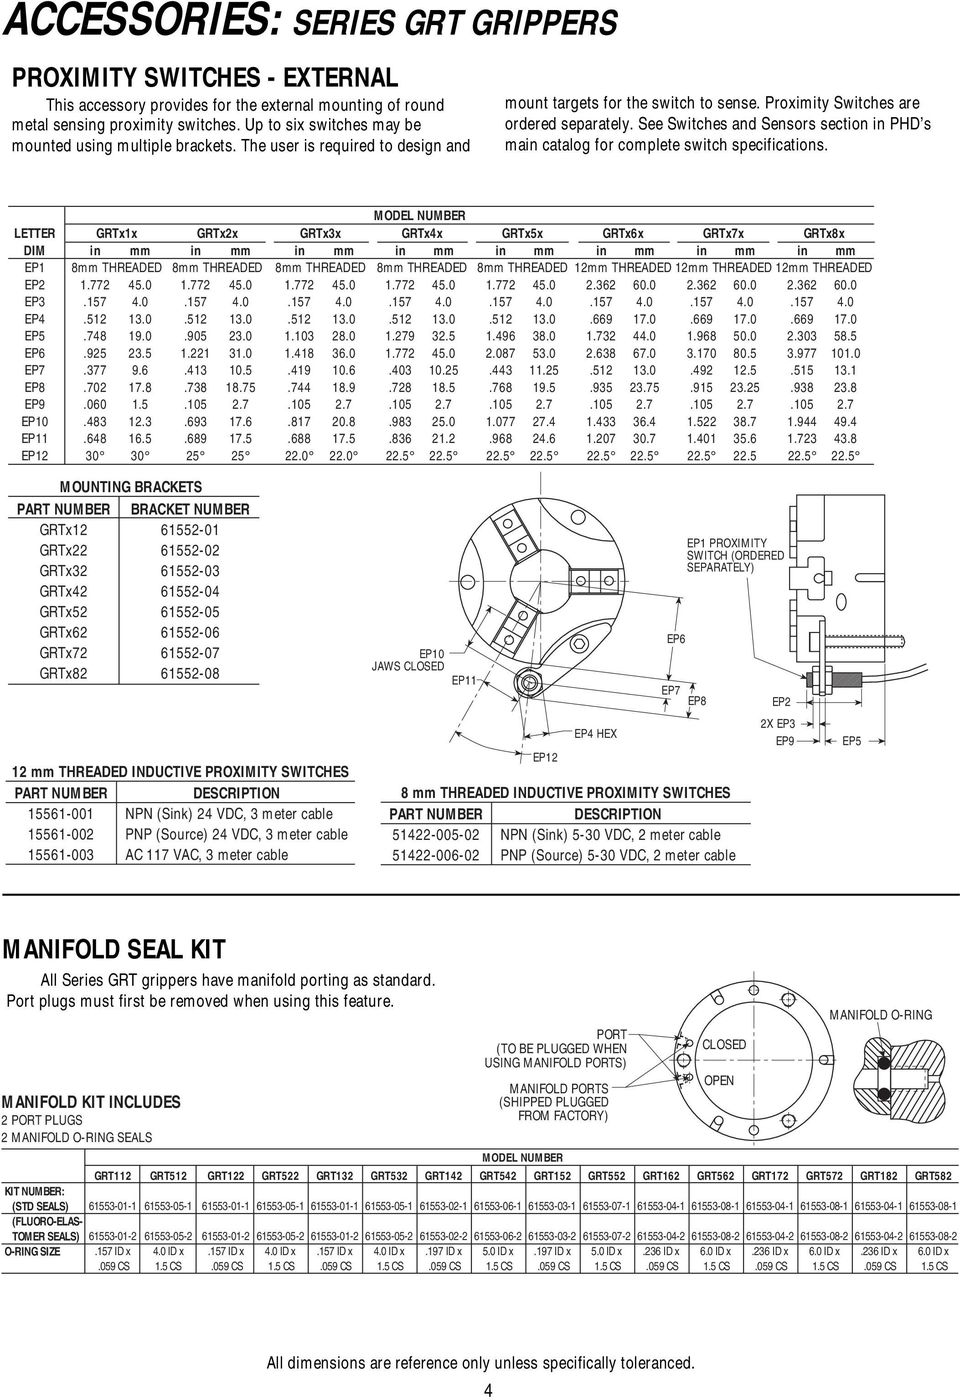 See Switches and Sensors section in PHD s main catalog for complete switch specifications. LETTER DIM EP1 EP2 EP3 EP4 EP5 EP6 EP7 EP8 EP9 EP10 EP11 EP12 in mm 8mm THREADED 1.772 45.0.157 4.0.512 13.0.748 19.